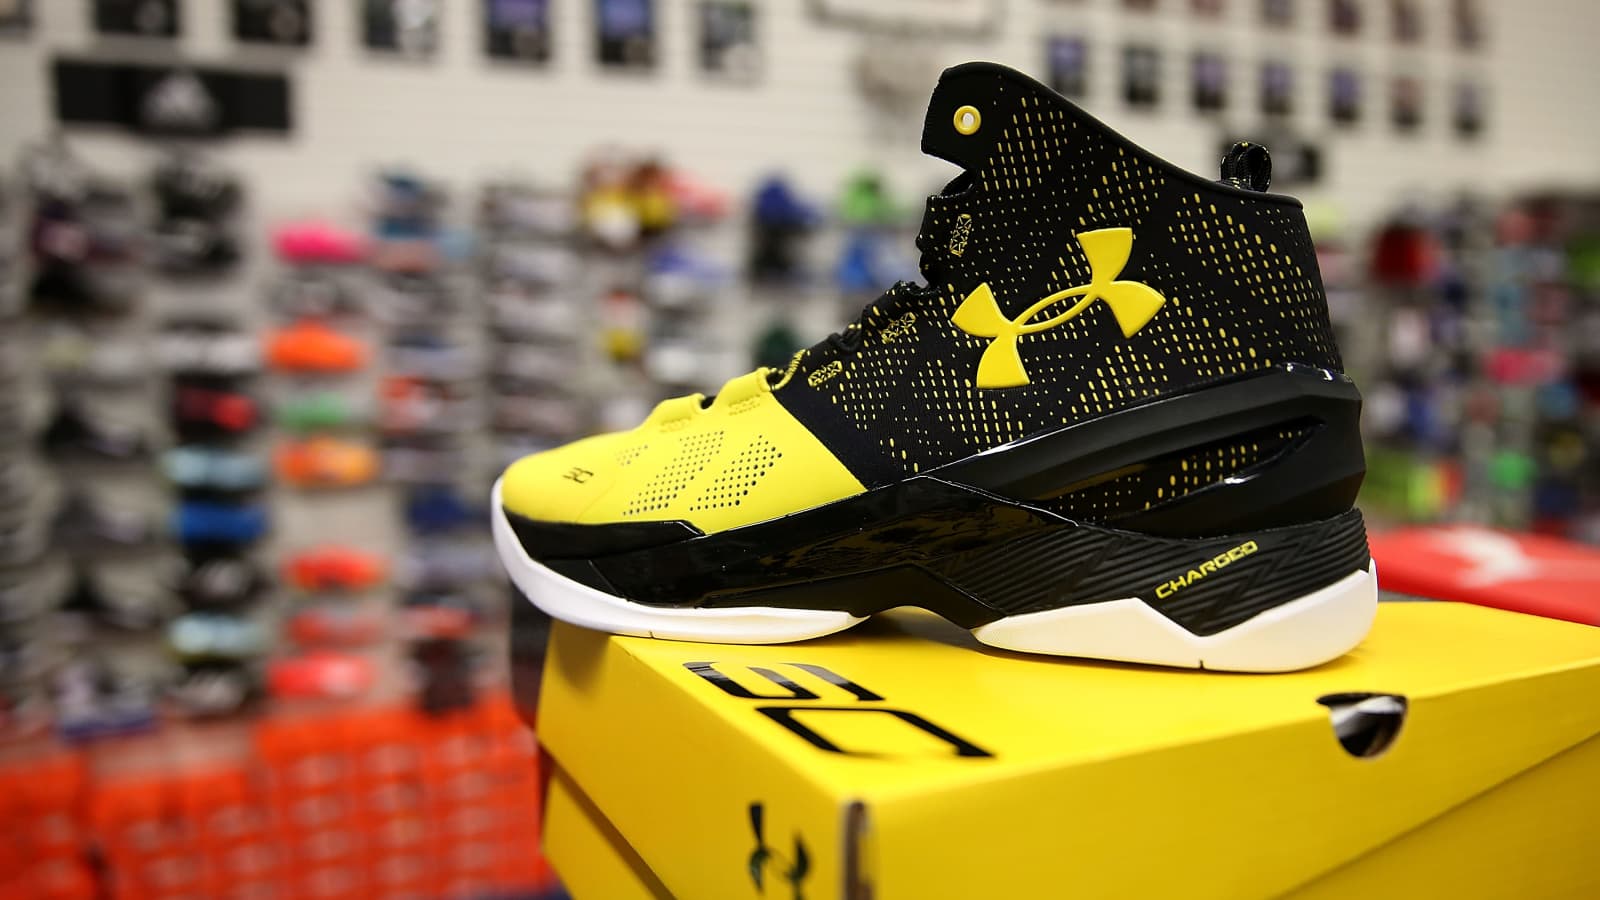 Are Under Armour Shoes Cool?